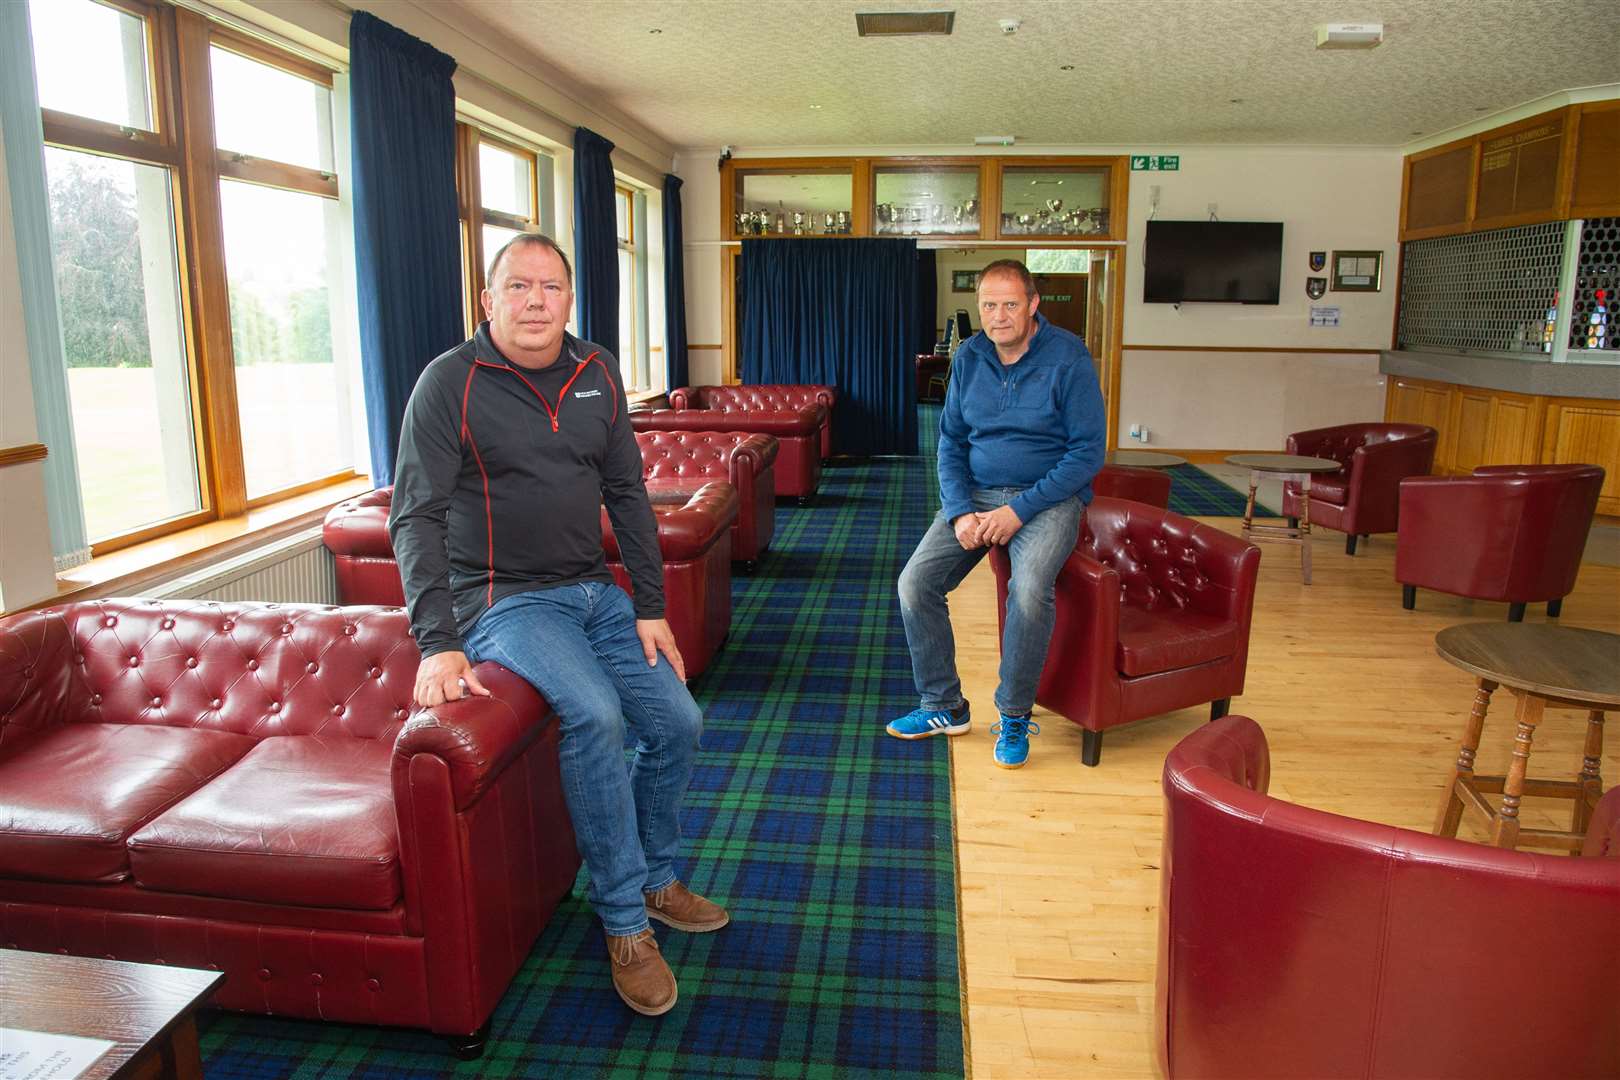 Huntly Golf Club committee members David Morrison (left) and Trevor Buckley. Picture: Daniel Forsyth.